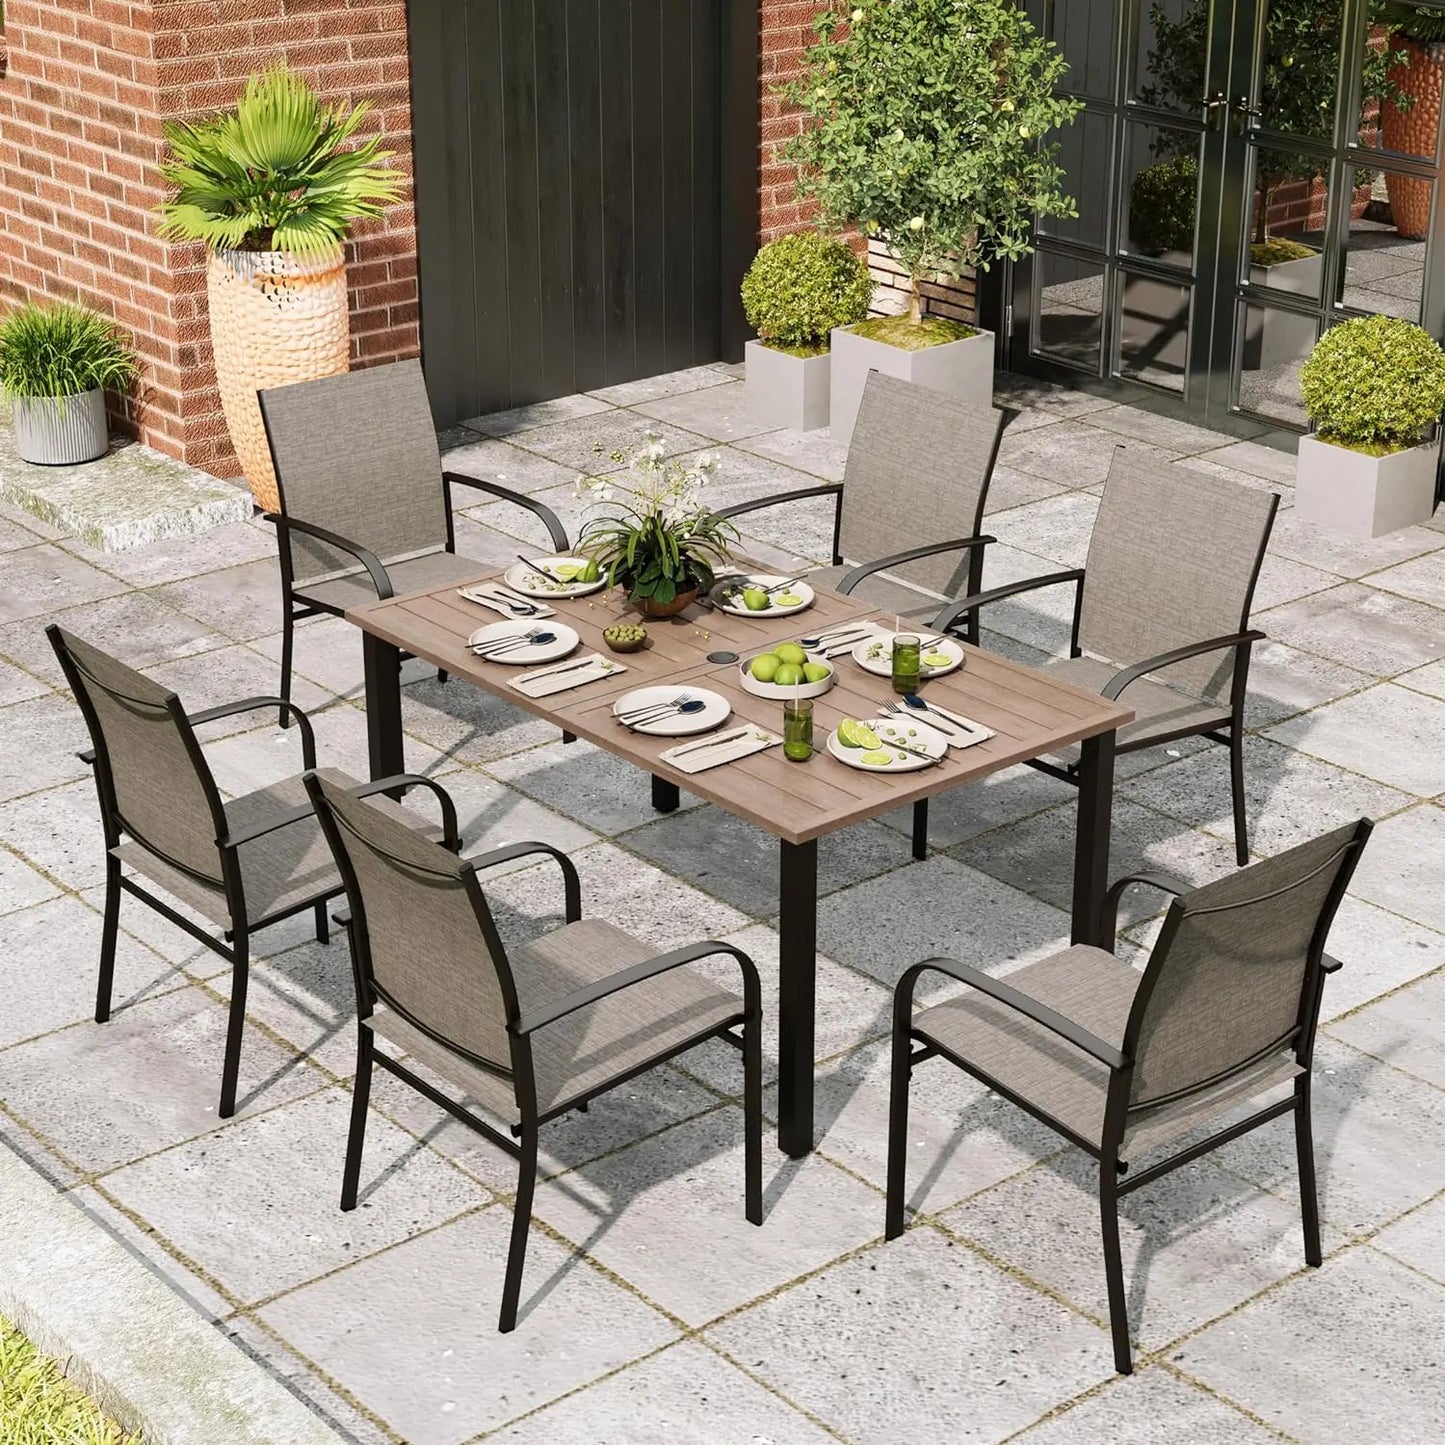 Outdoor Dining Set Chairs and Table Outdoor Dining